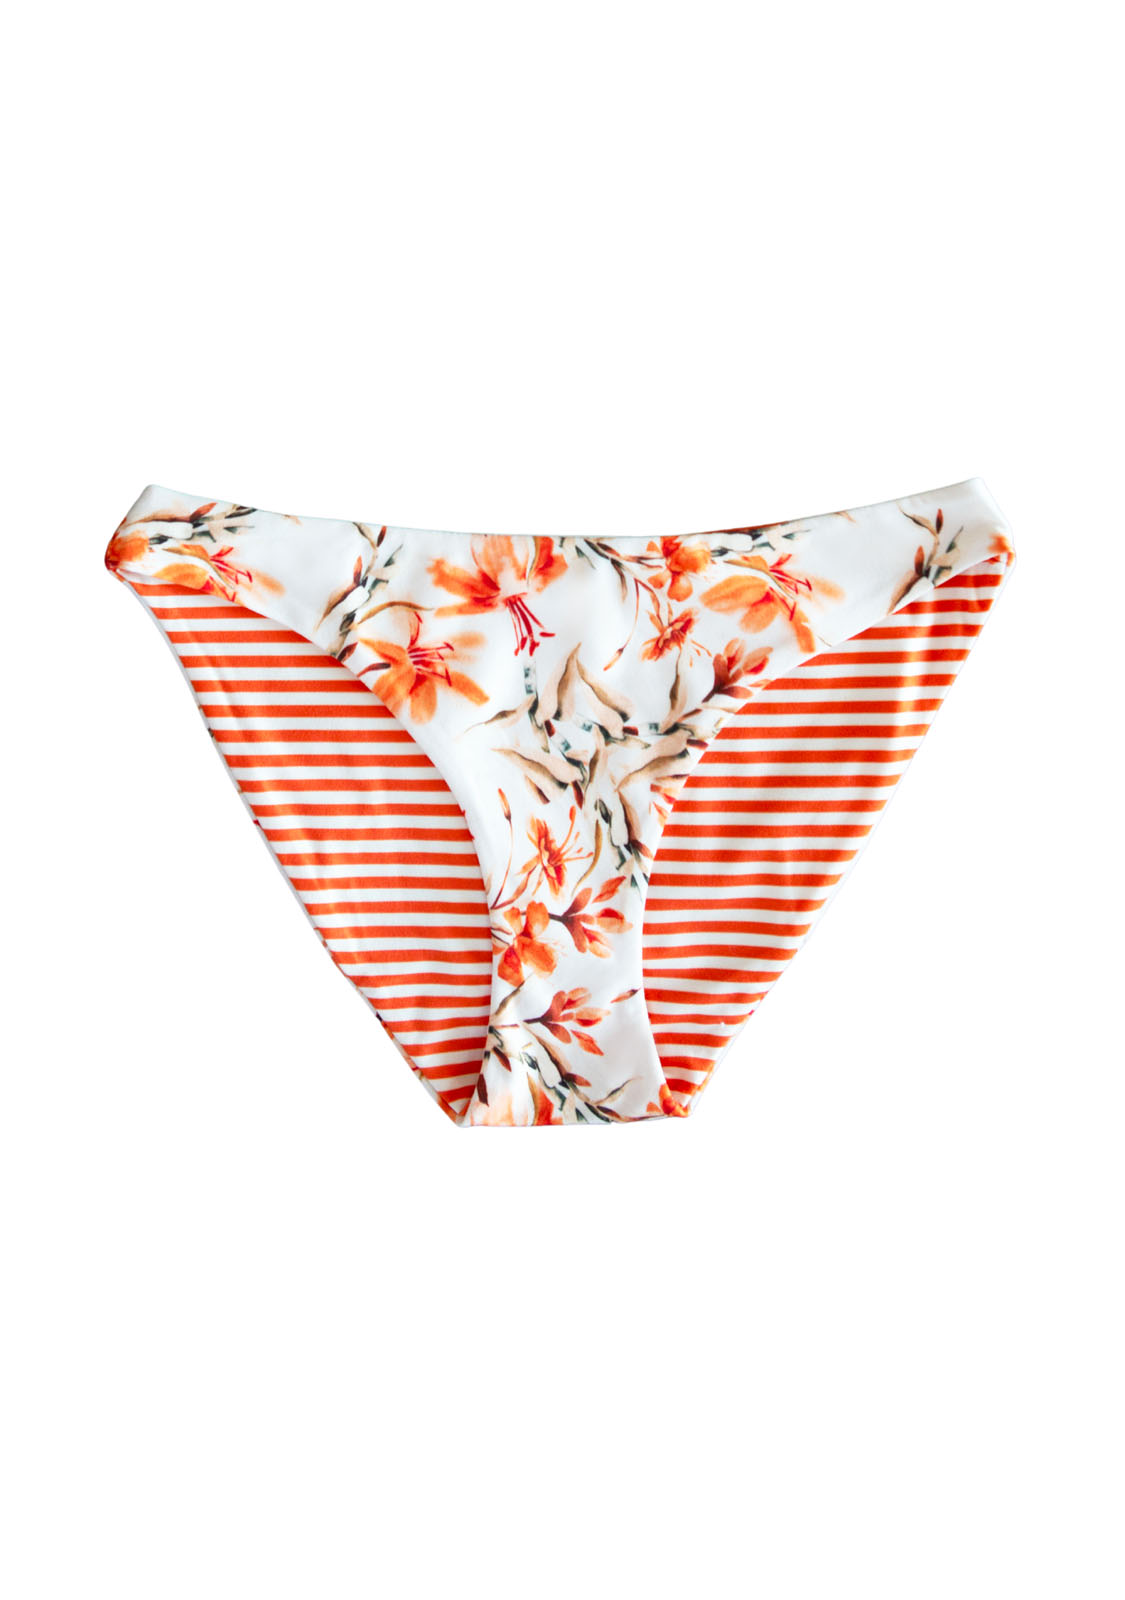 Swimwear bottoms full coverage reversible for Teen Girls and women stripes florals by chance Loves an American brand